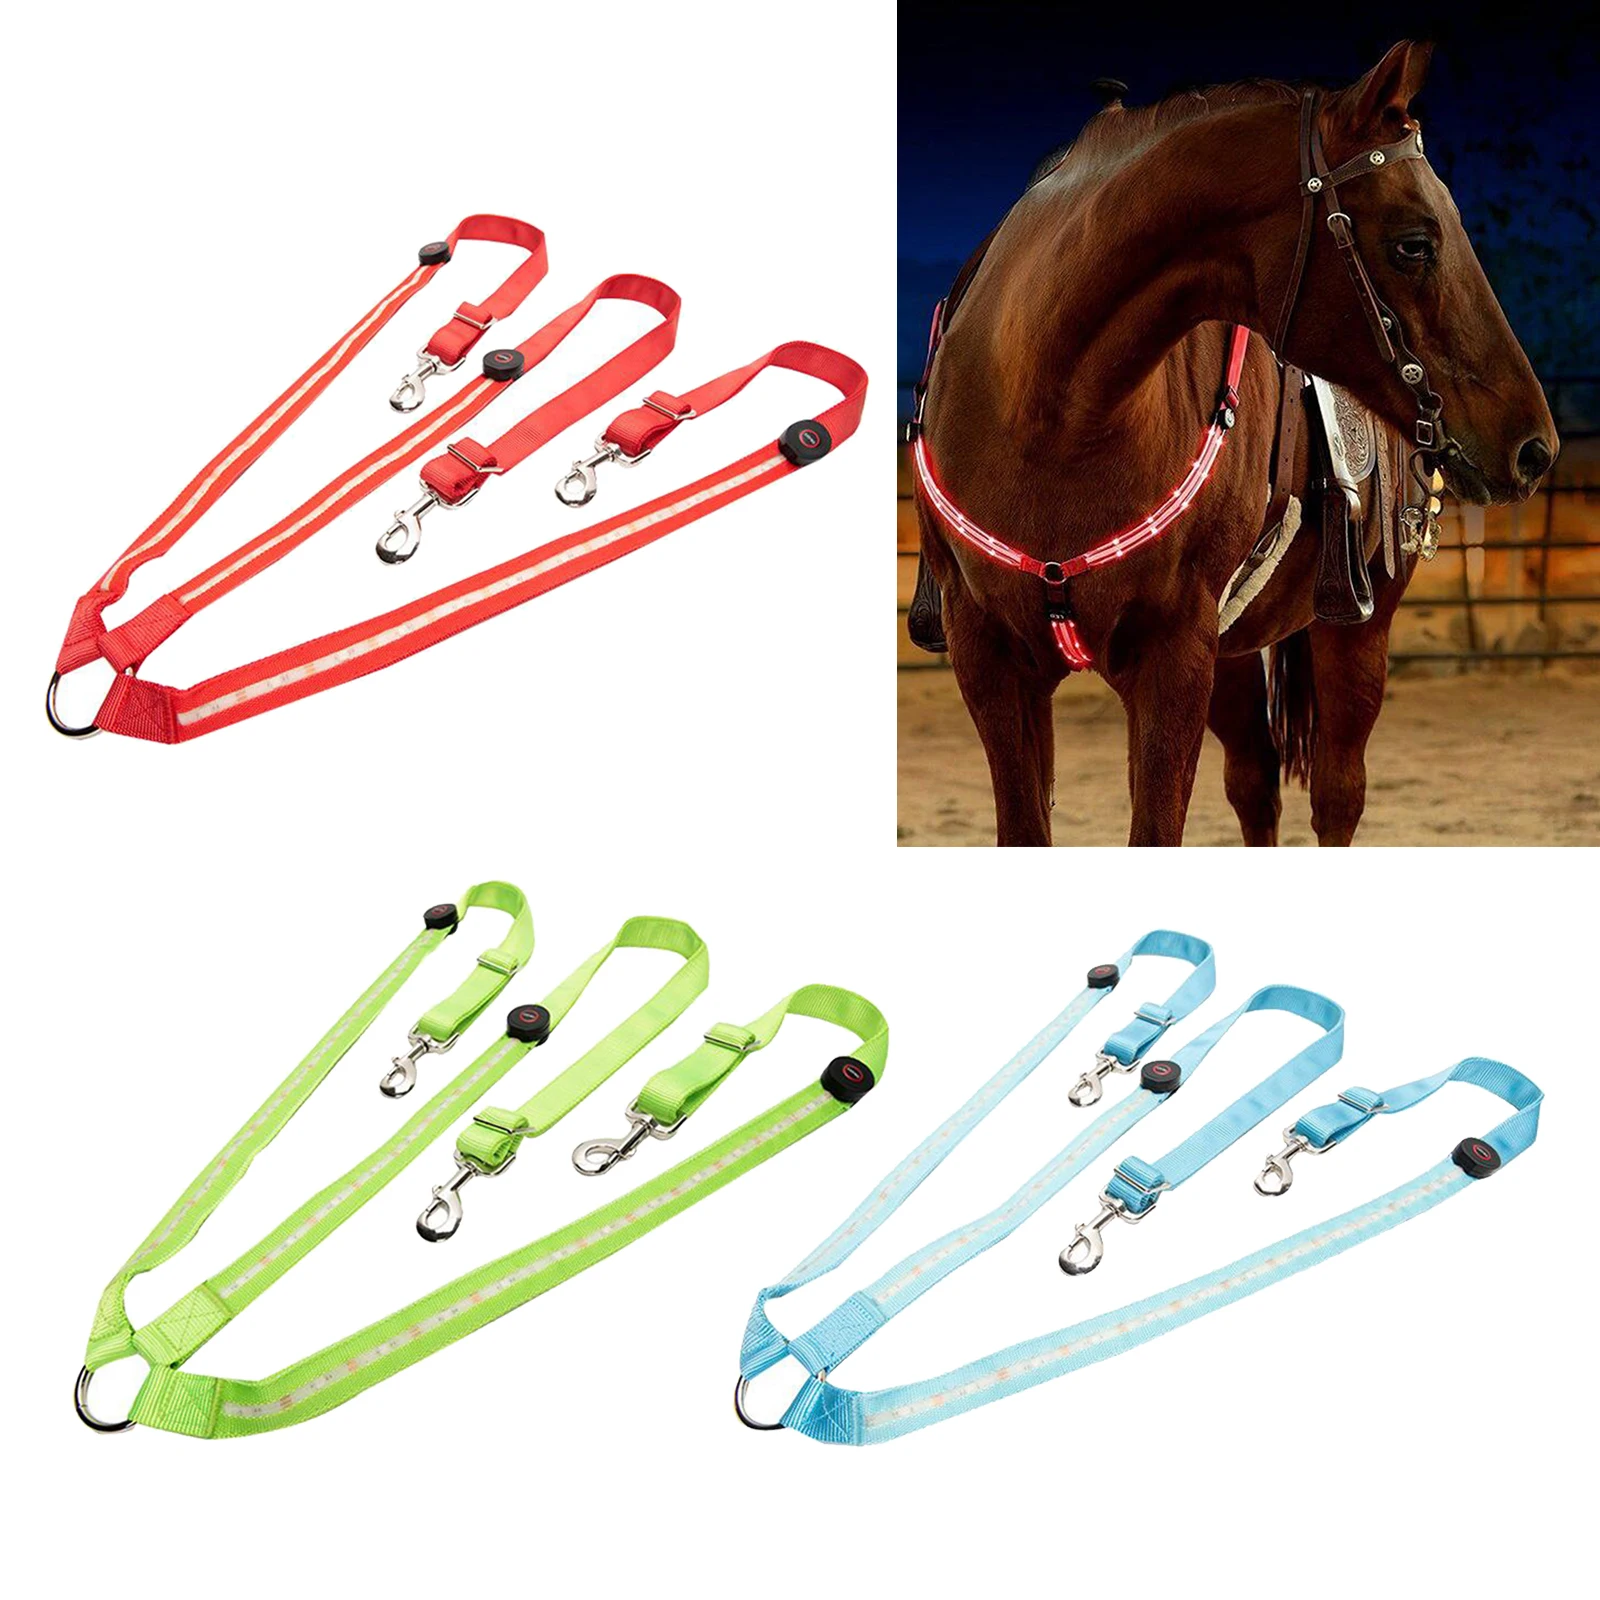 Details about   LED Horse Riding Head Harness Saddle Halters Colorful Light Equestrian Equipment 